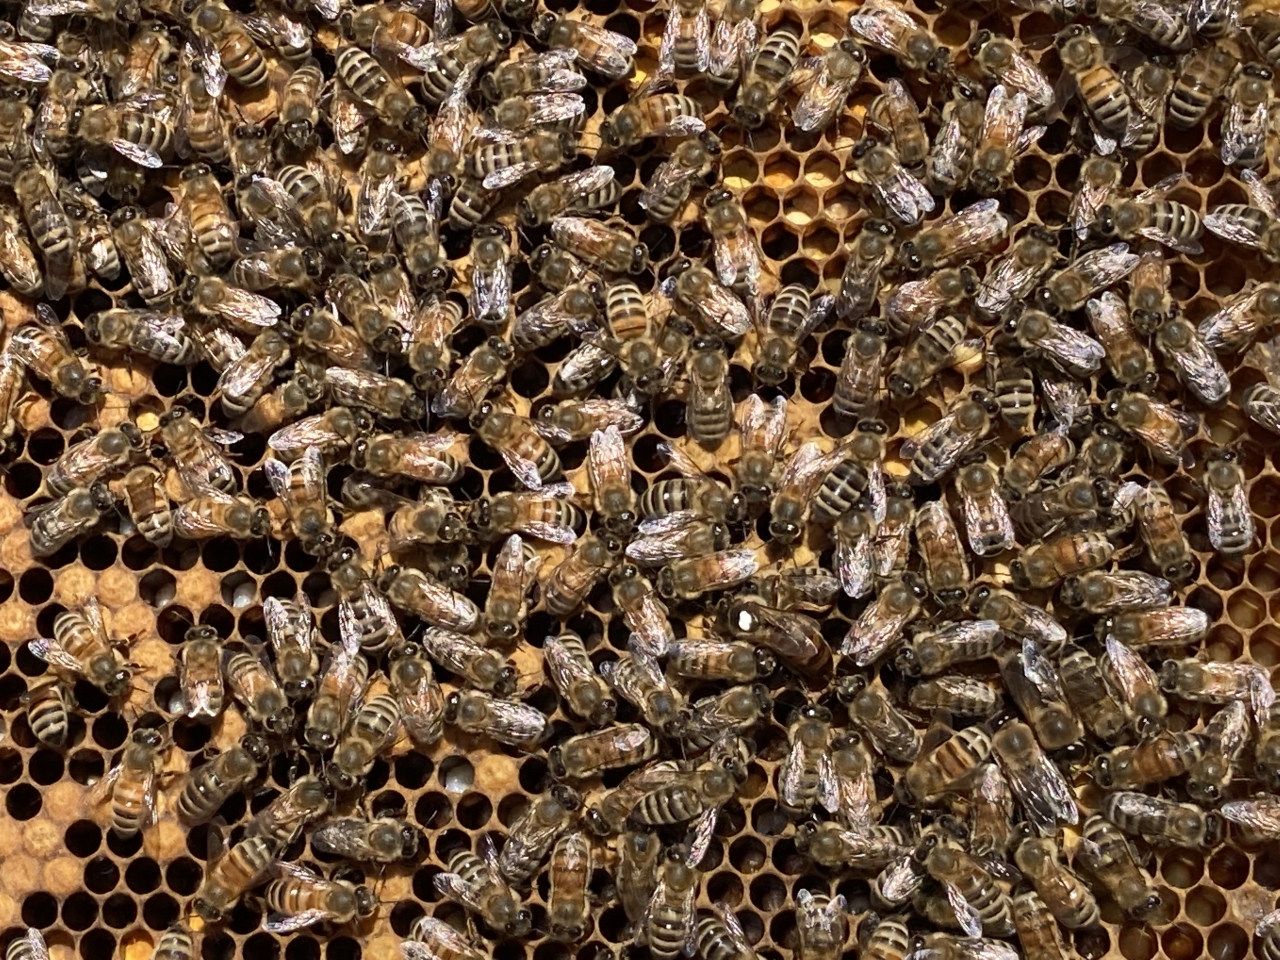 bees in hive